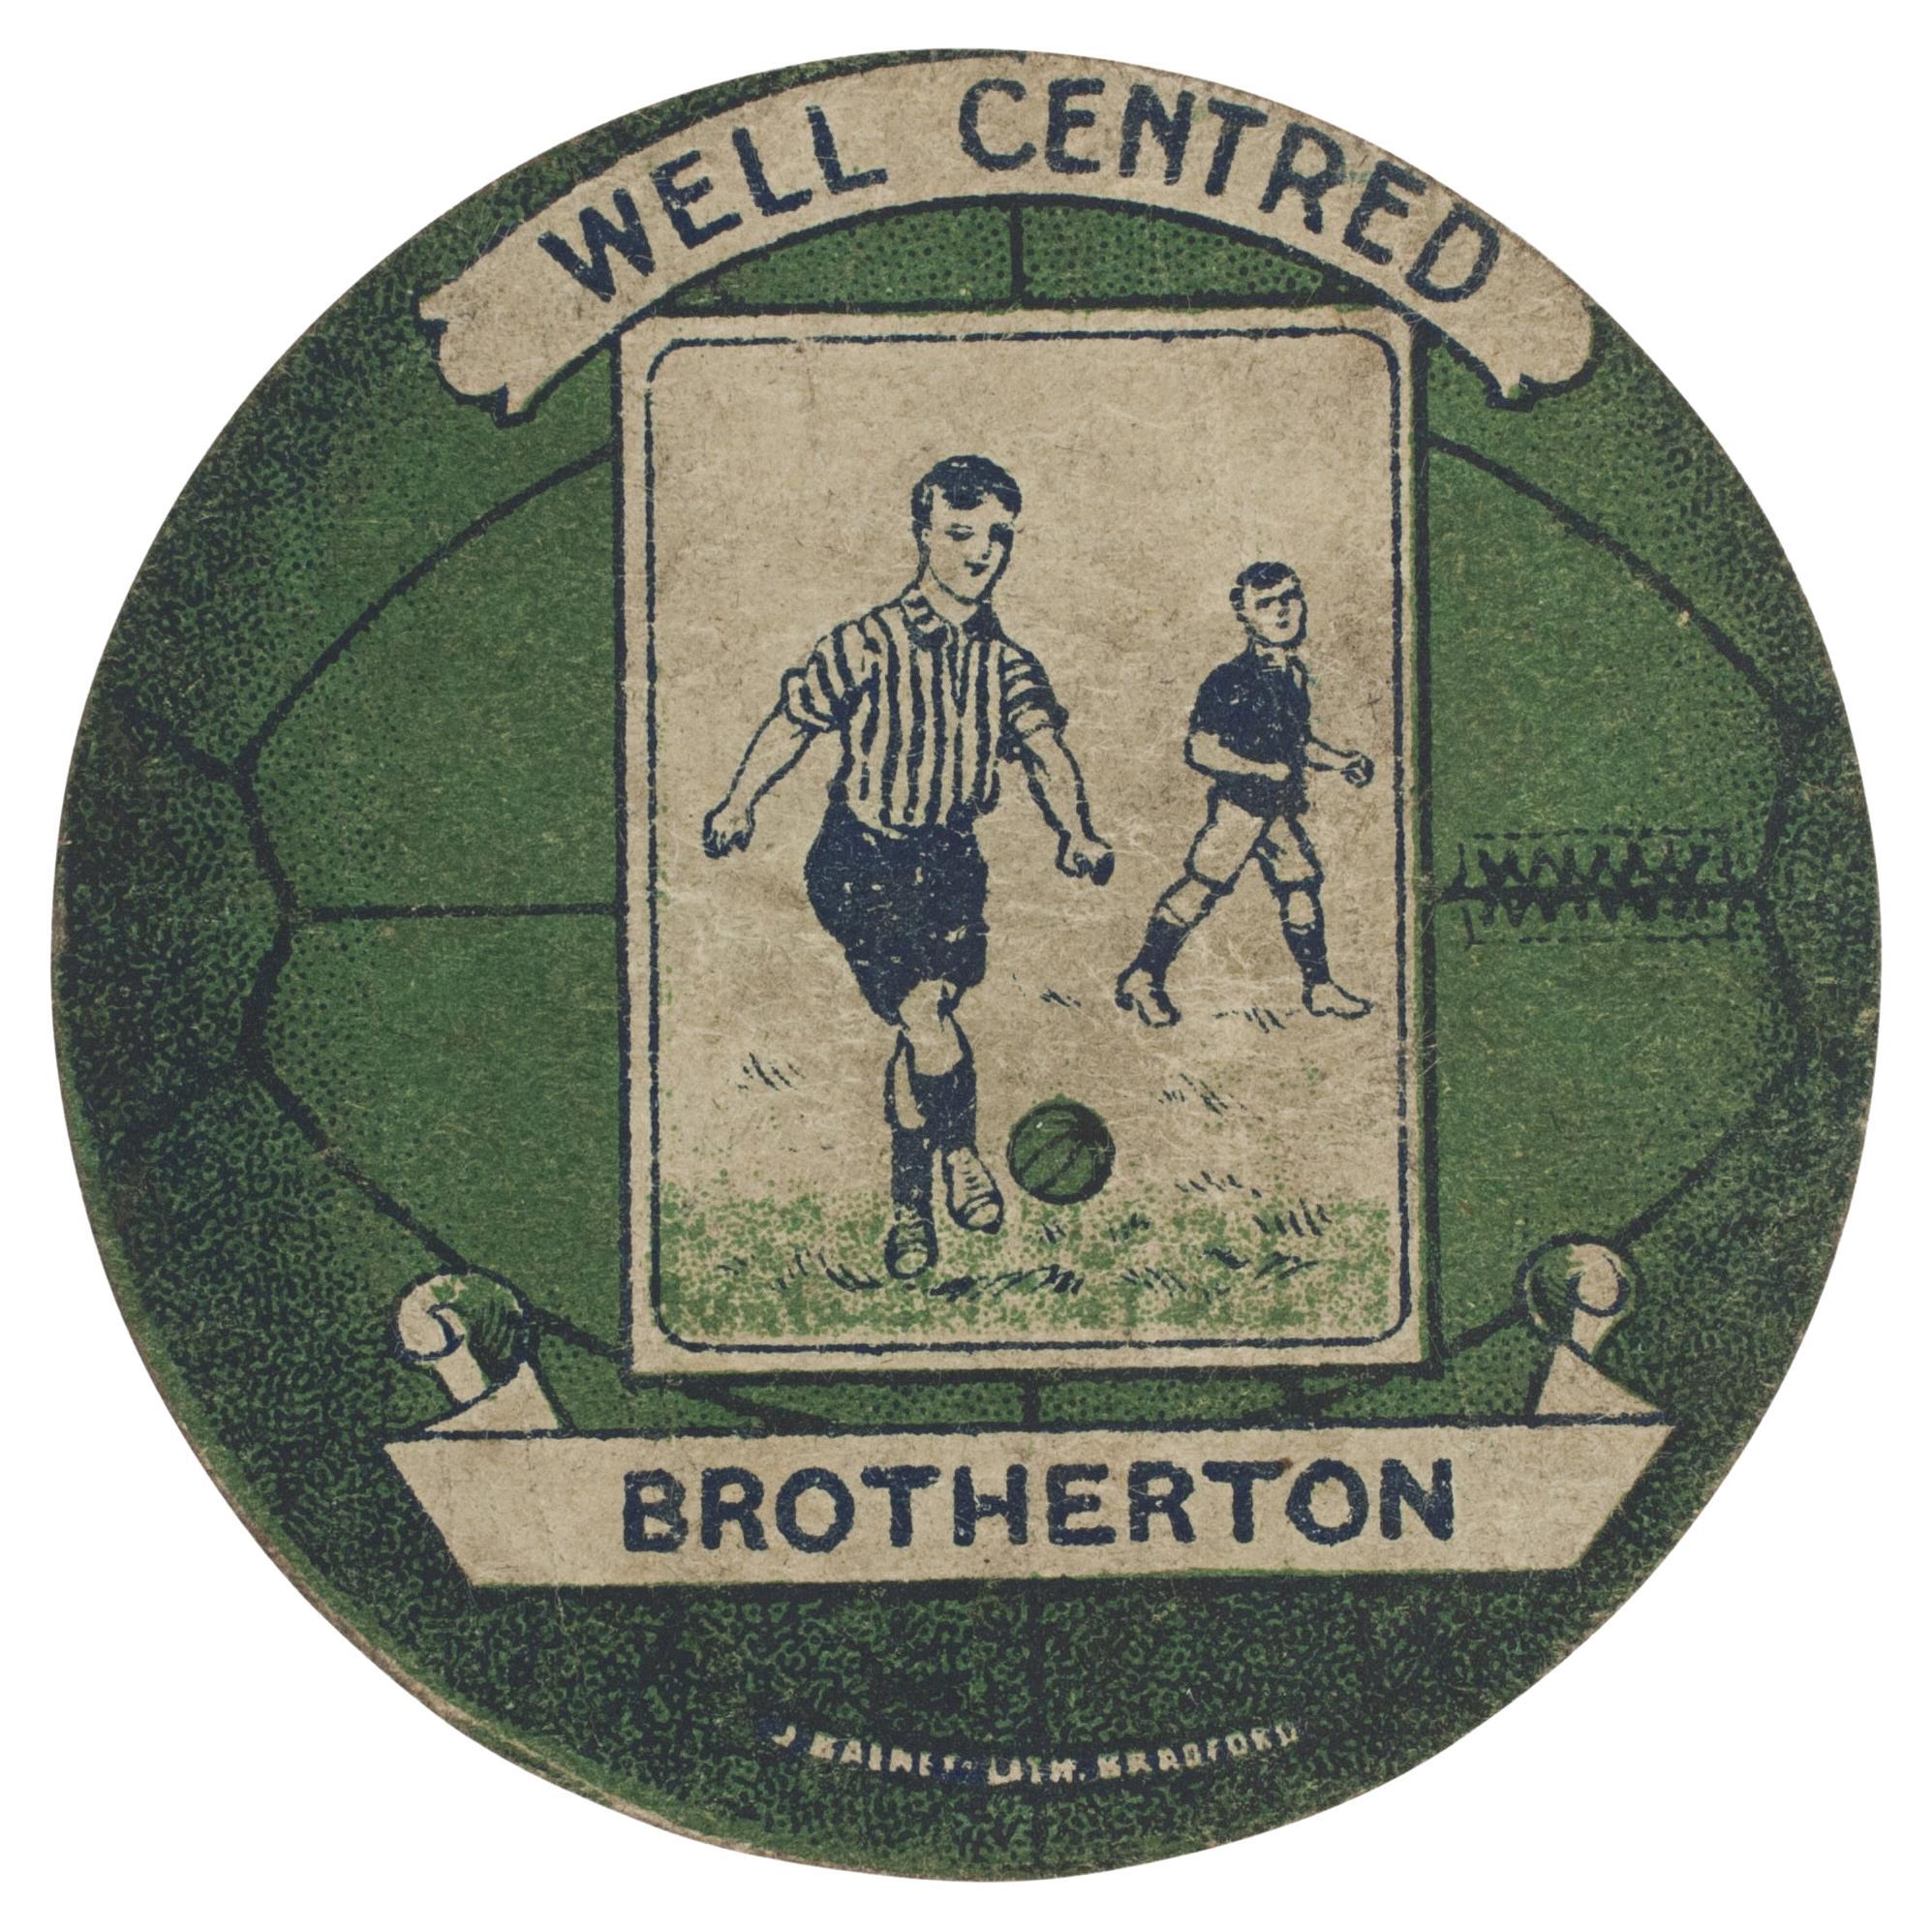 Vintage Baines Football Trade Card, Brotherton, Well Centred For Sale